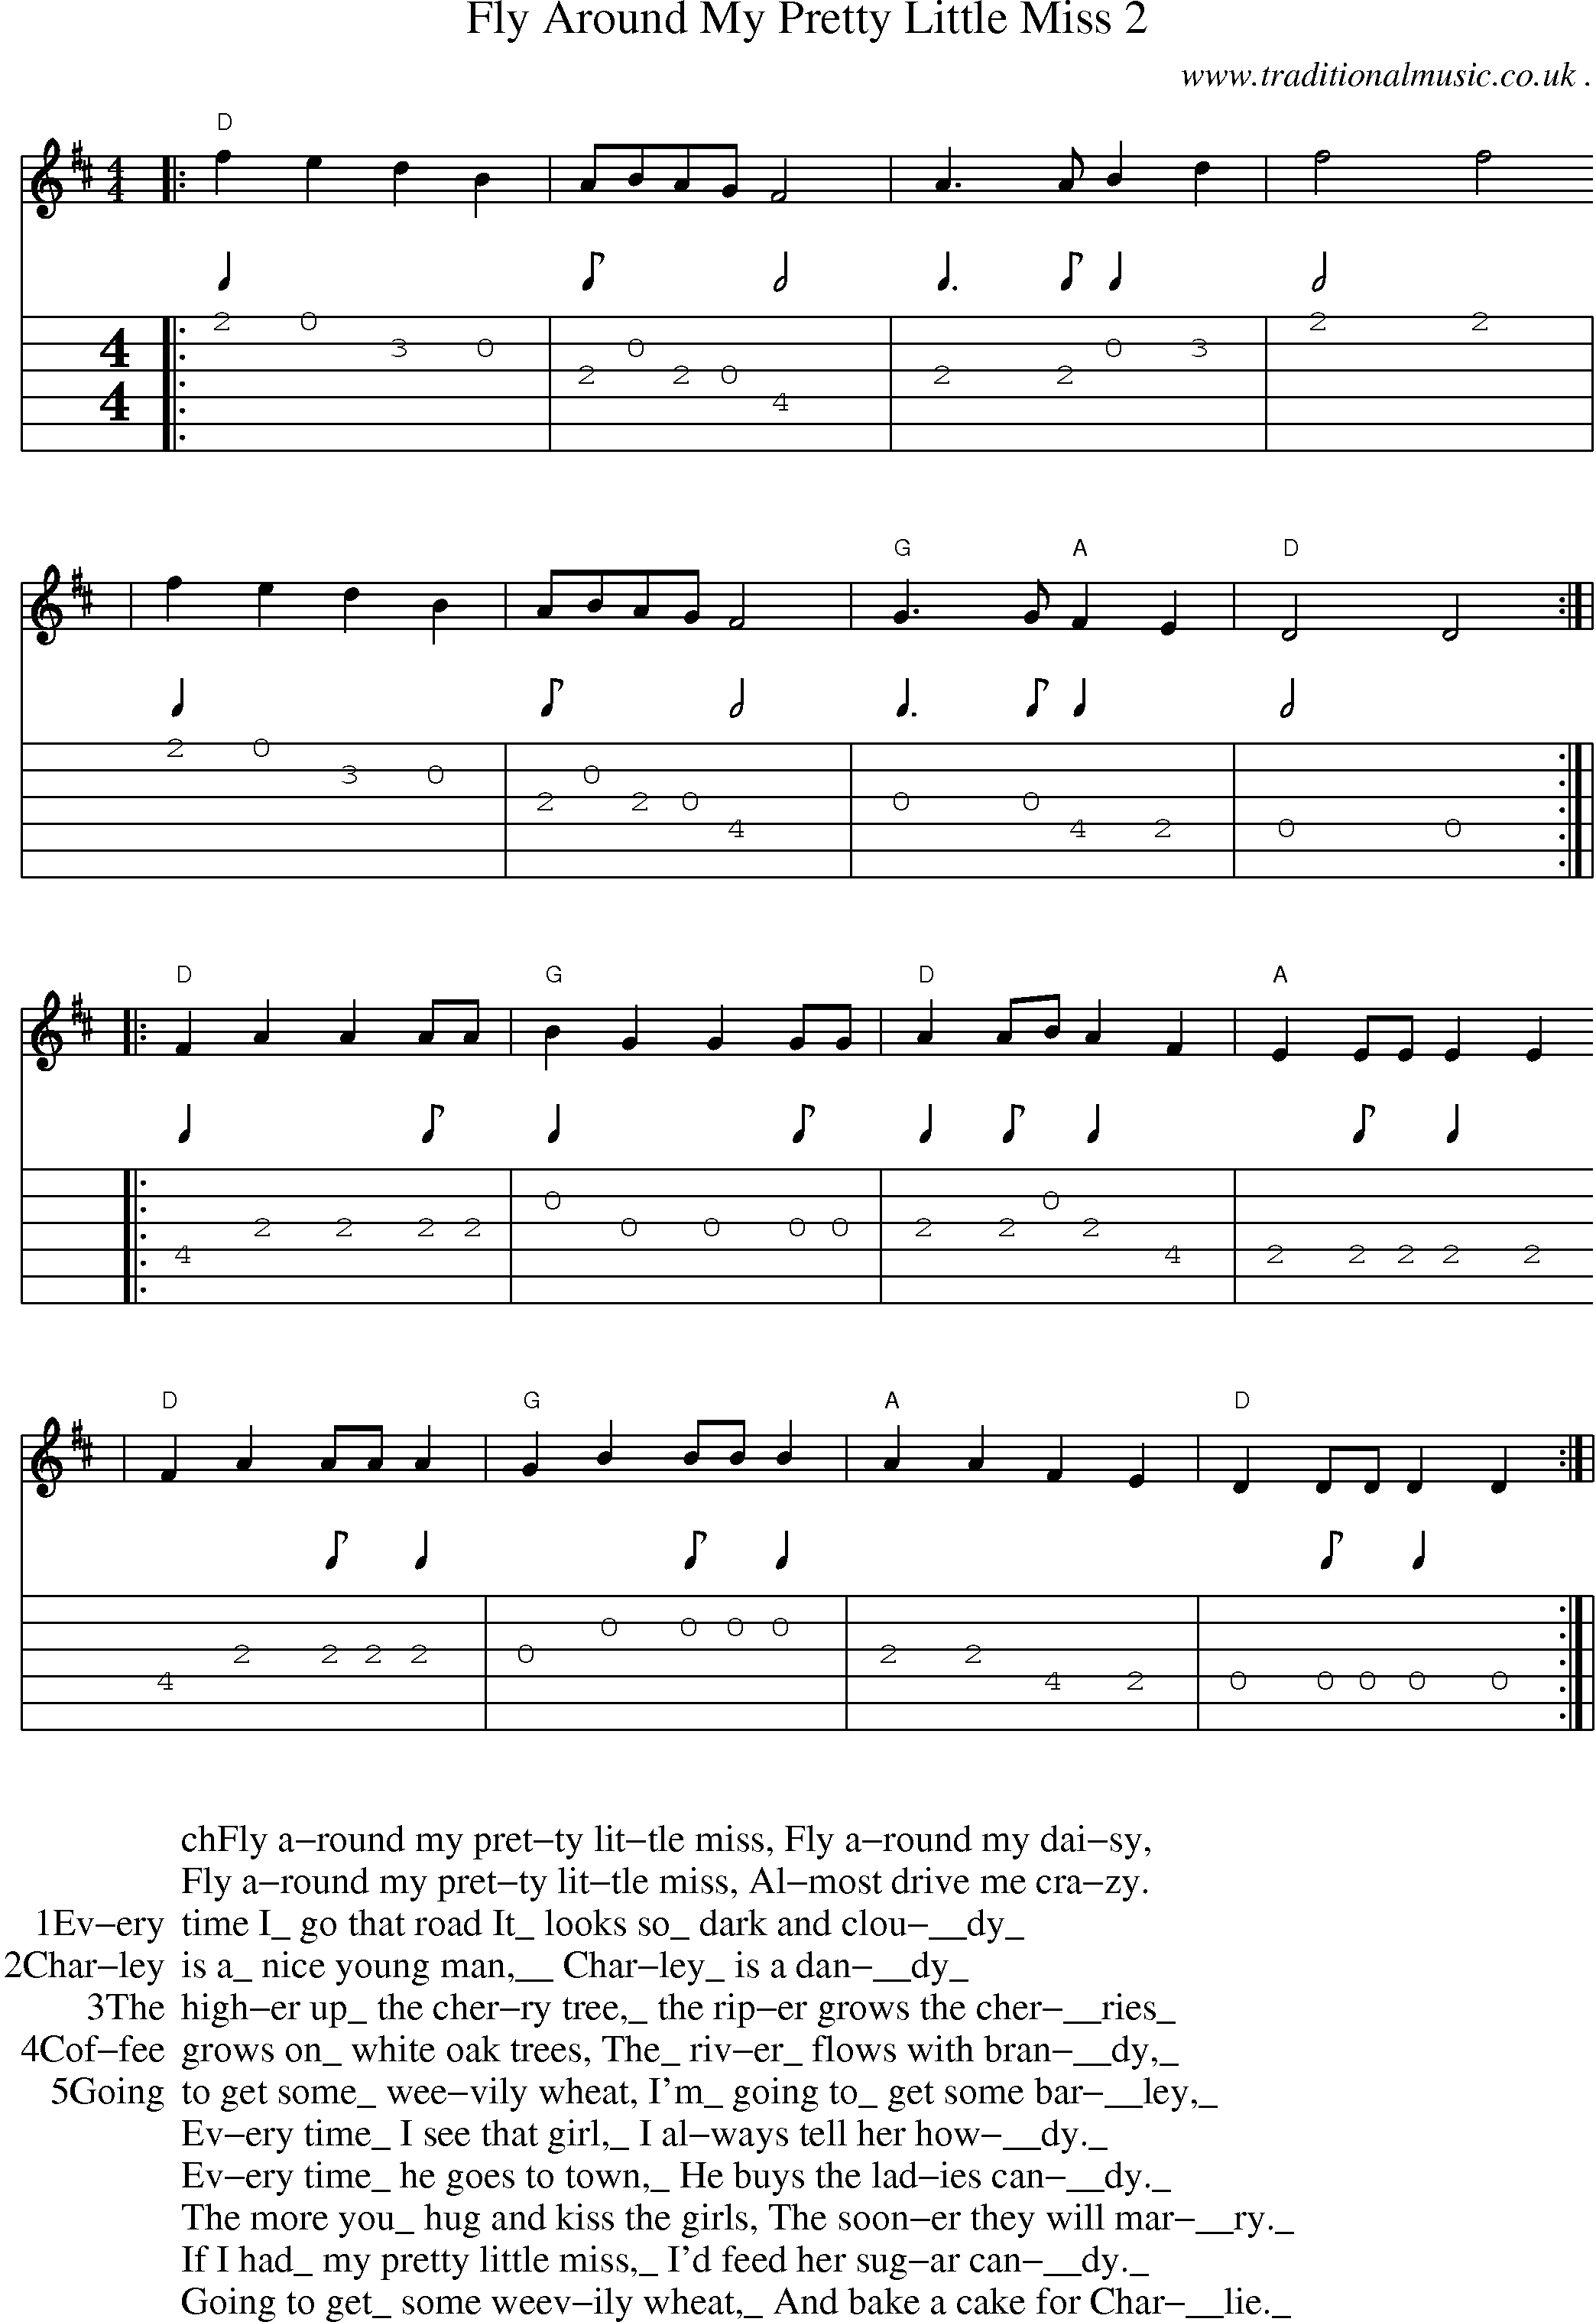 Music Score and Guitar Tabs for Fly Around My Pretty Little Miss 2